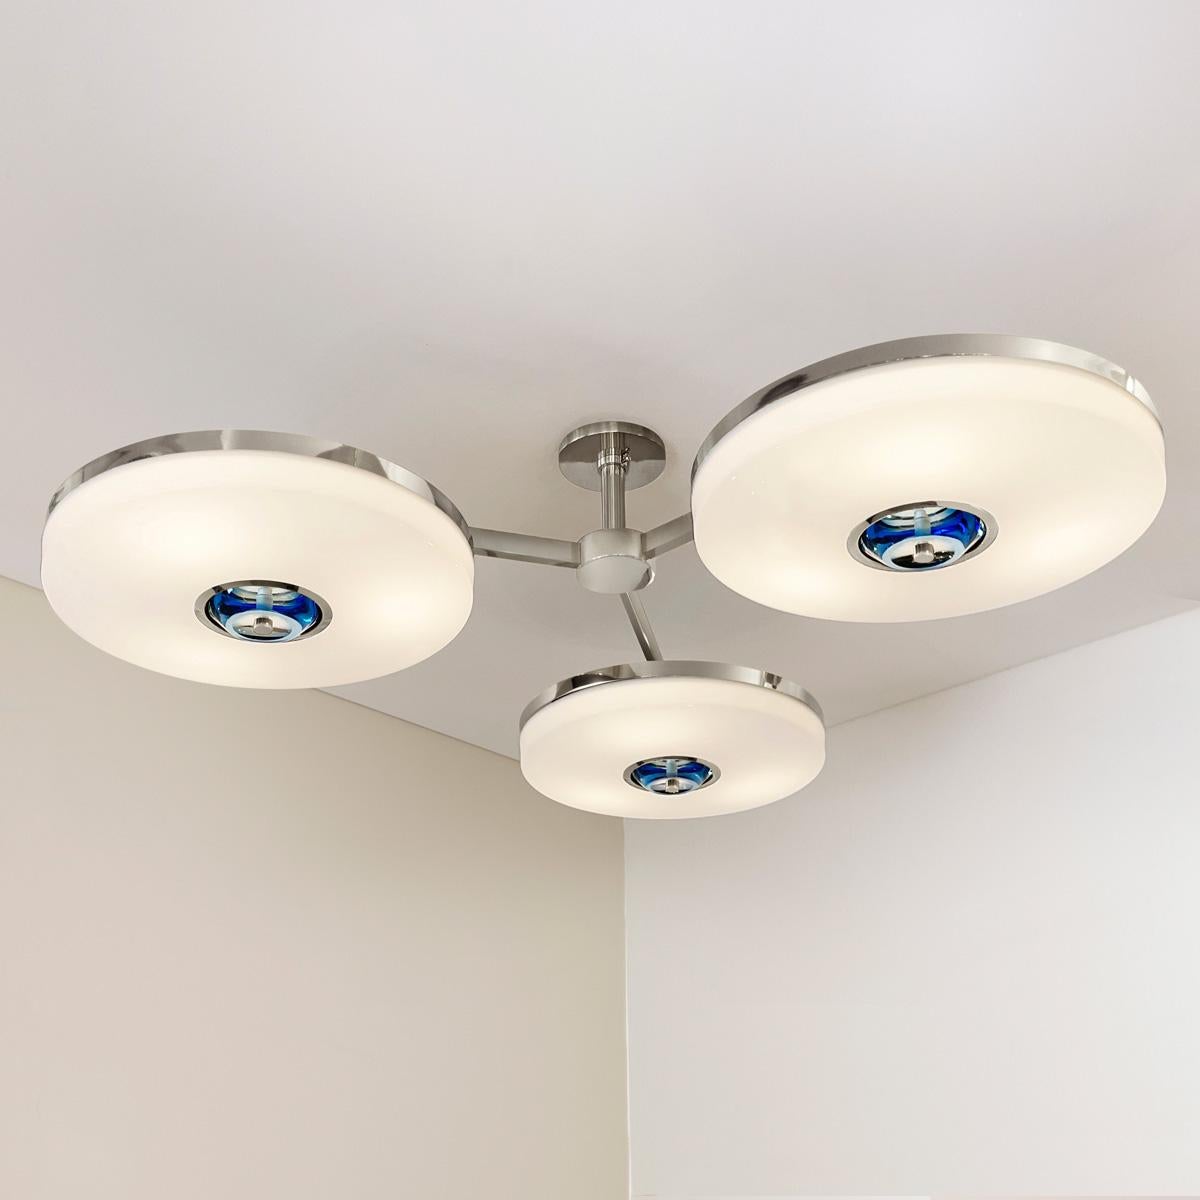 The Iris N.3 ceiling light is designed around three expansive acrylic shades with hand carved glass centers. This versatile fixture can be installed on a stem or as a flush mount. The first images show the fixture in our polished nickel